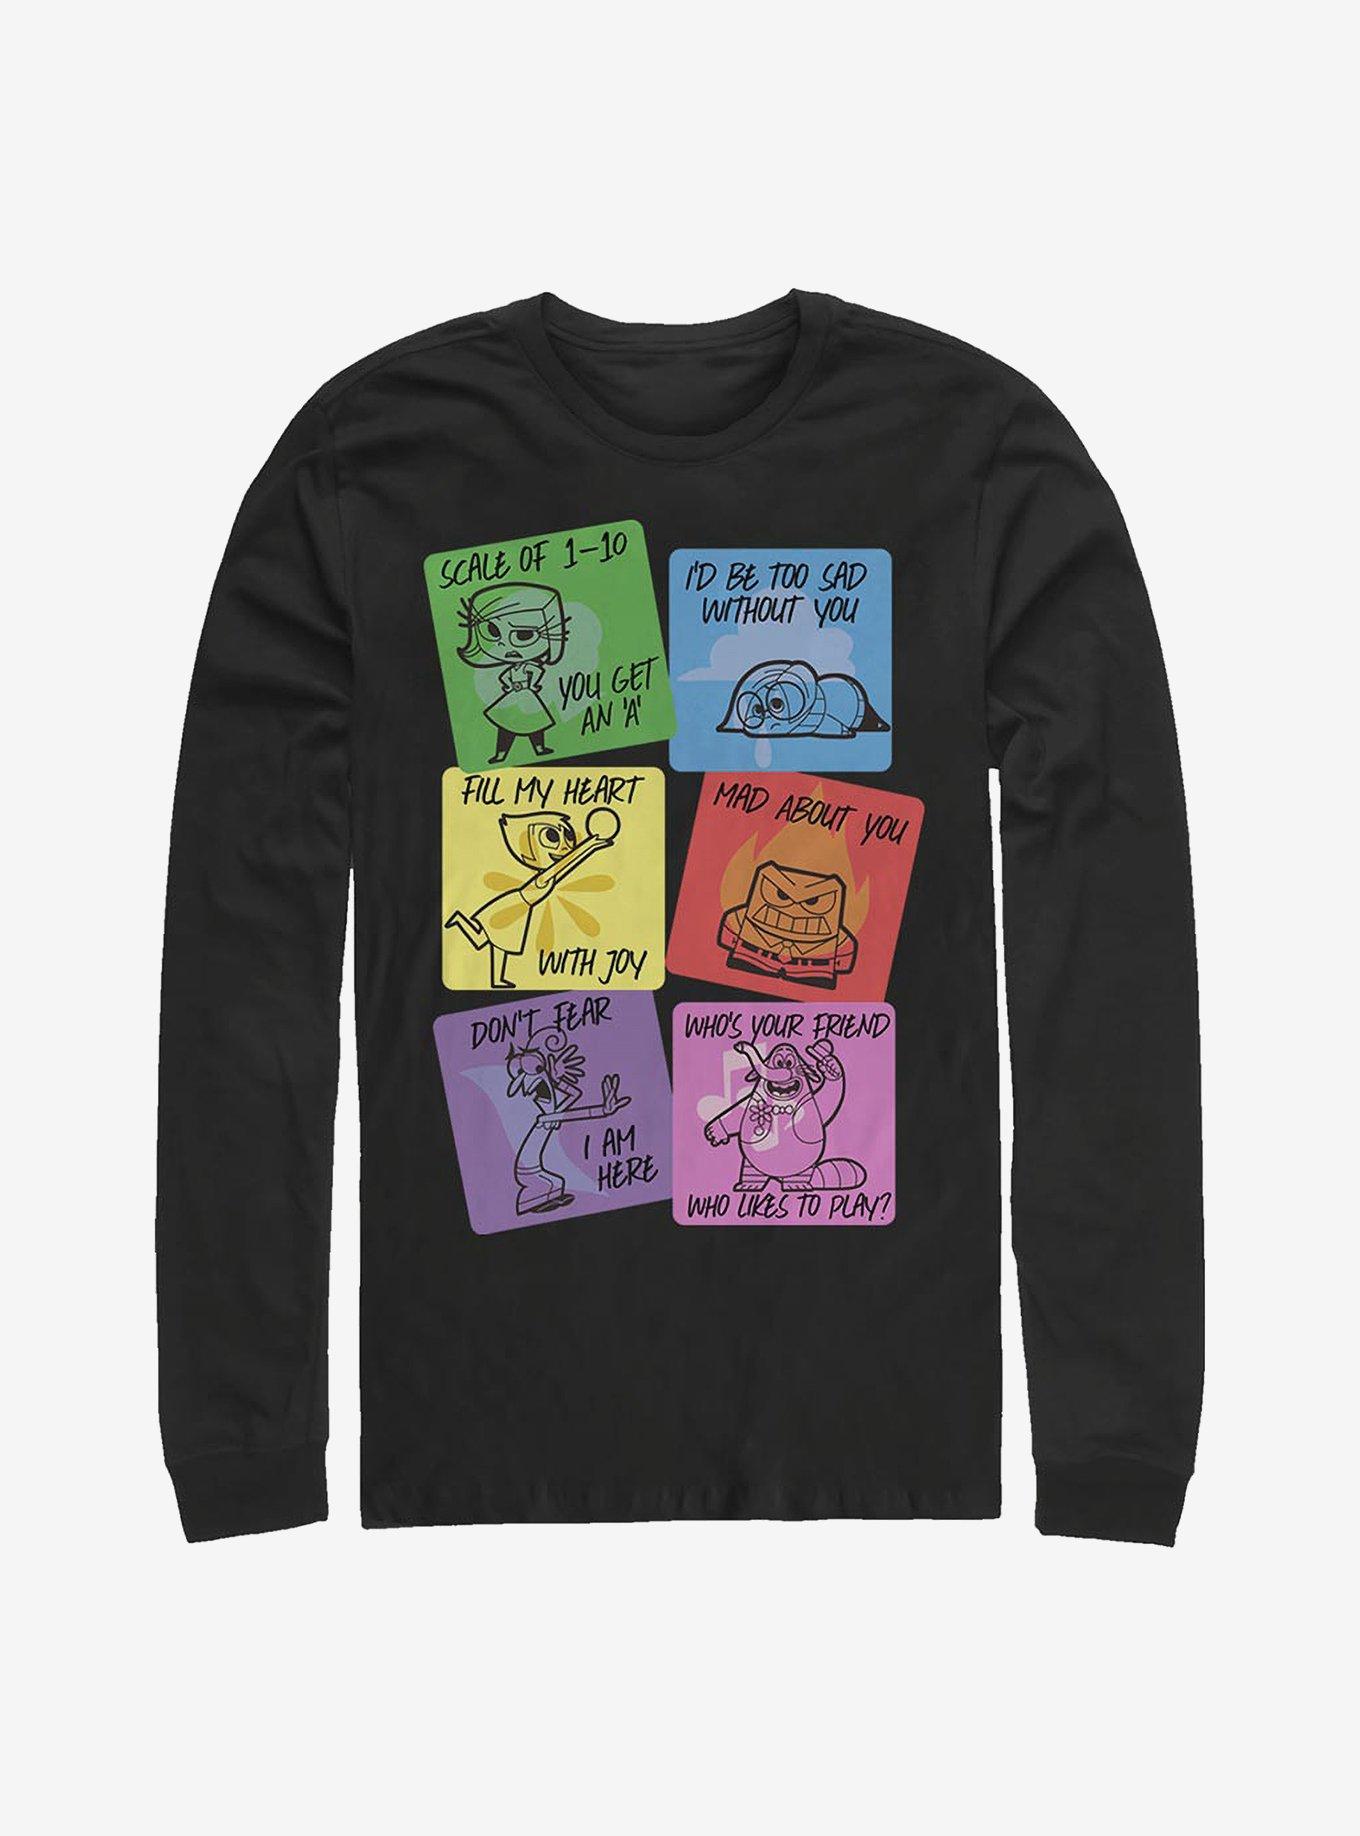 Disney Pixar Inside Out Vday Cards Long-Sleeve T-Shirt | BoxLunch